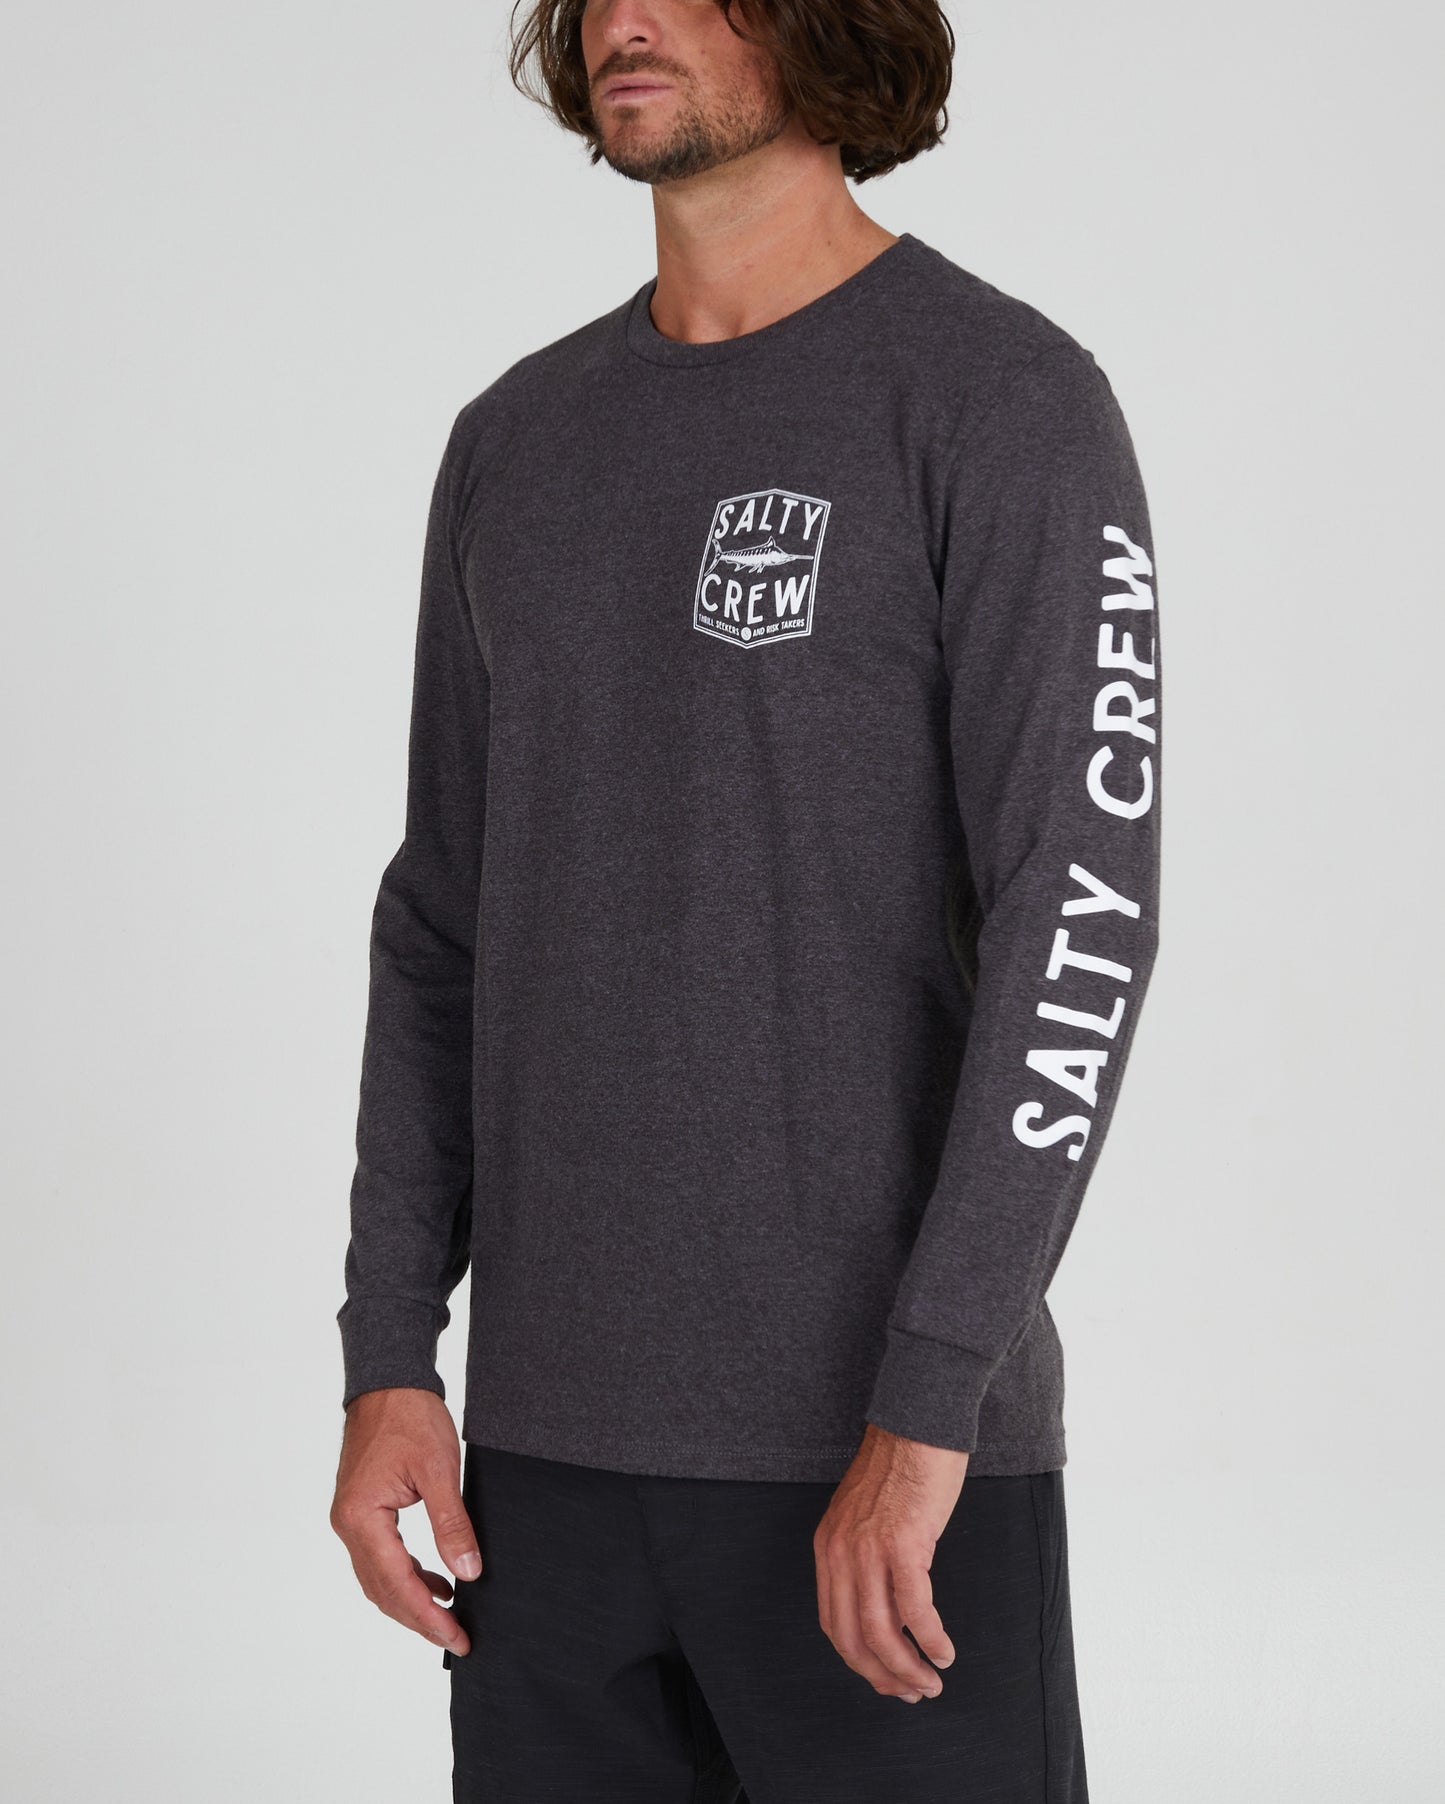 On body front angle of the Fishery Charcoal Heather L/S Standard Tee